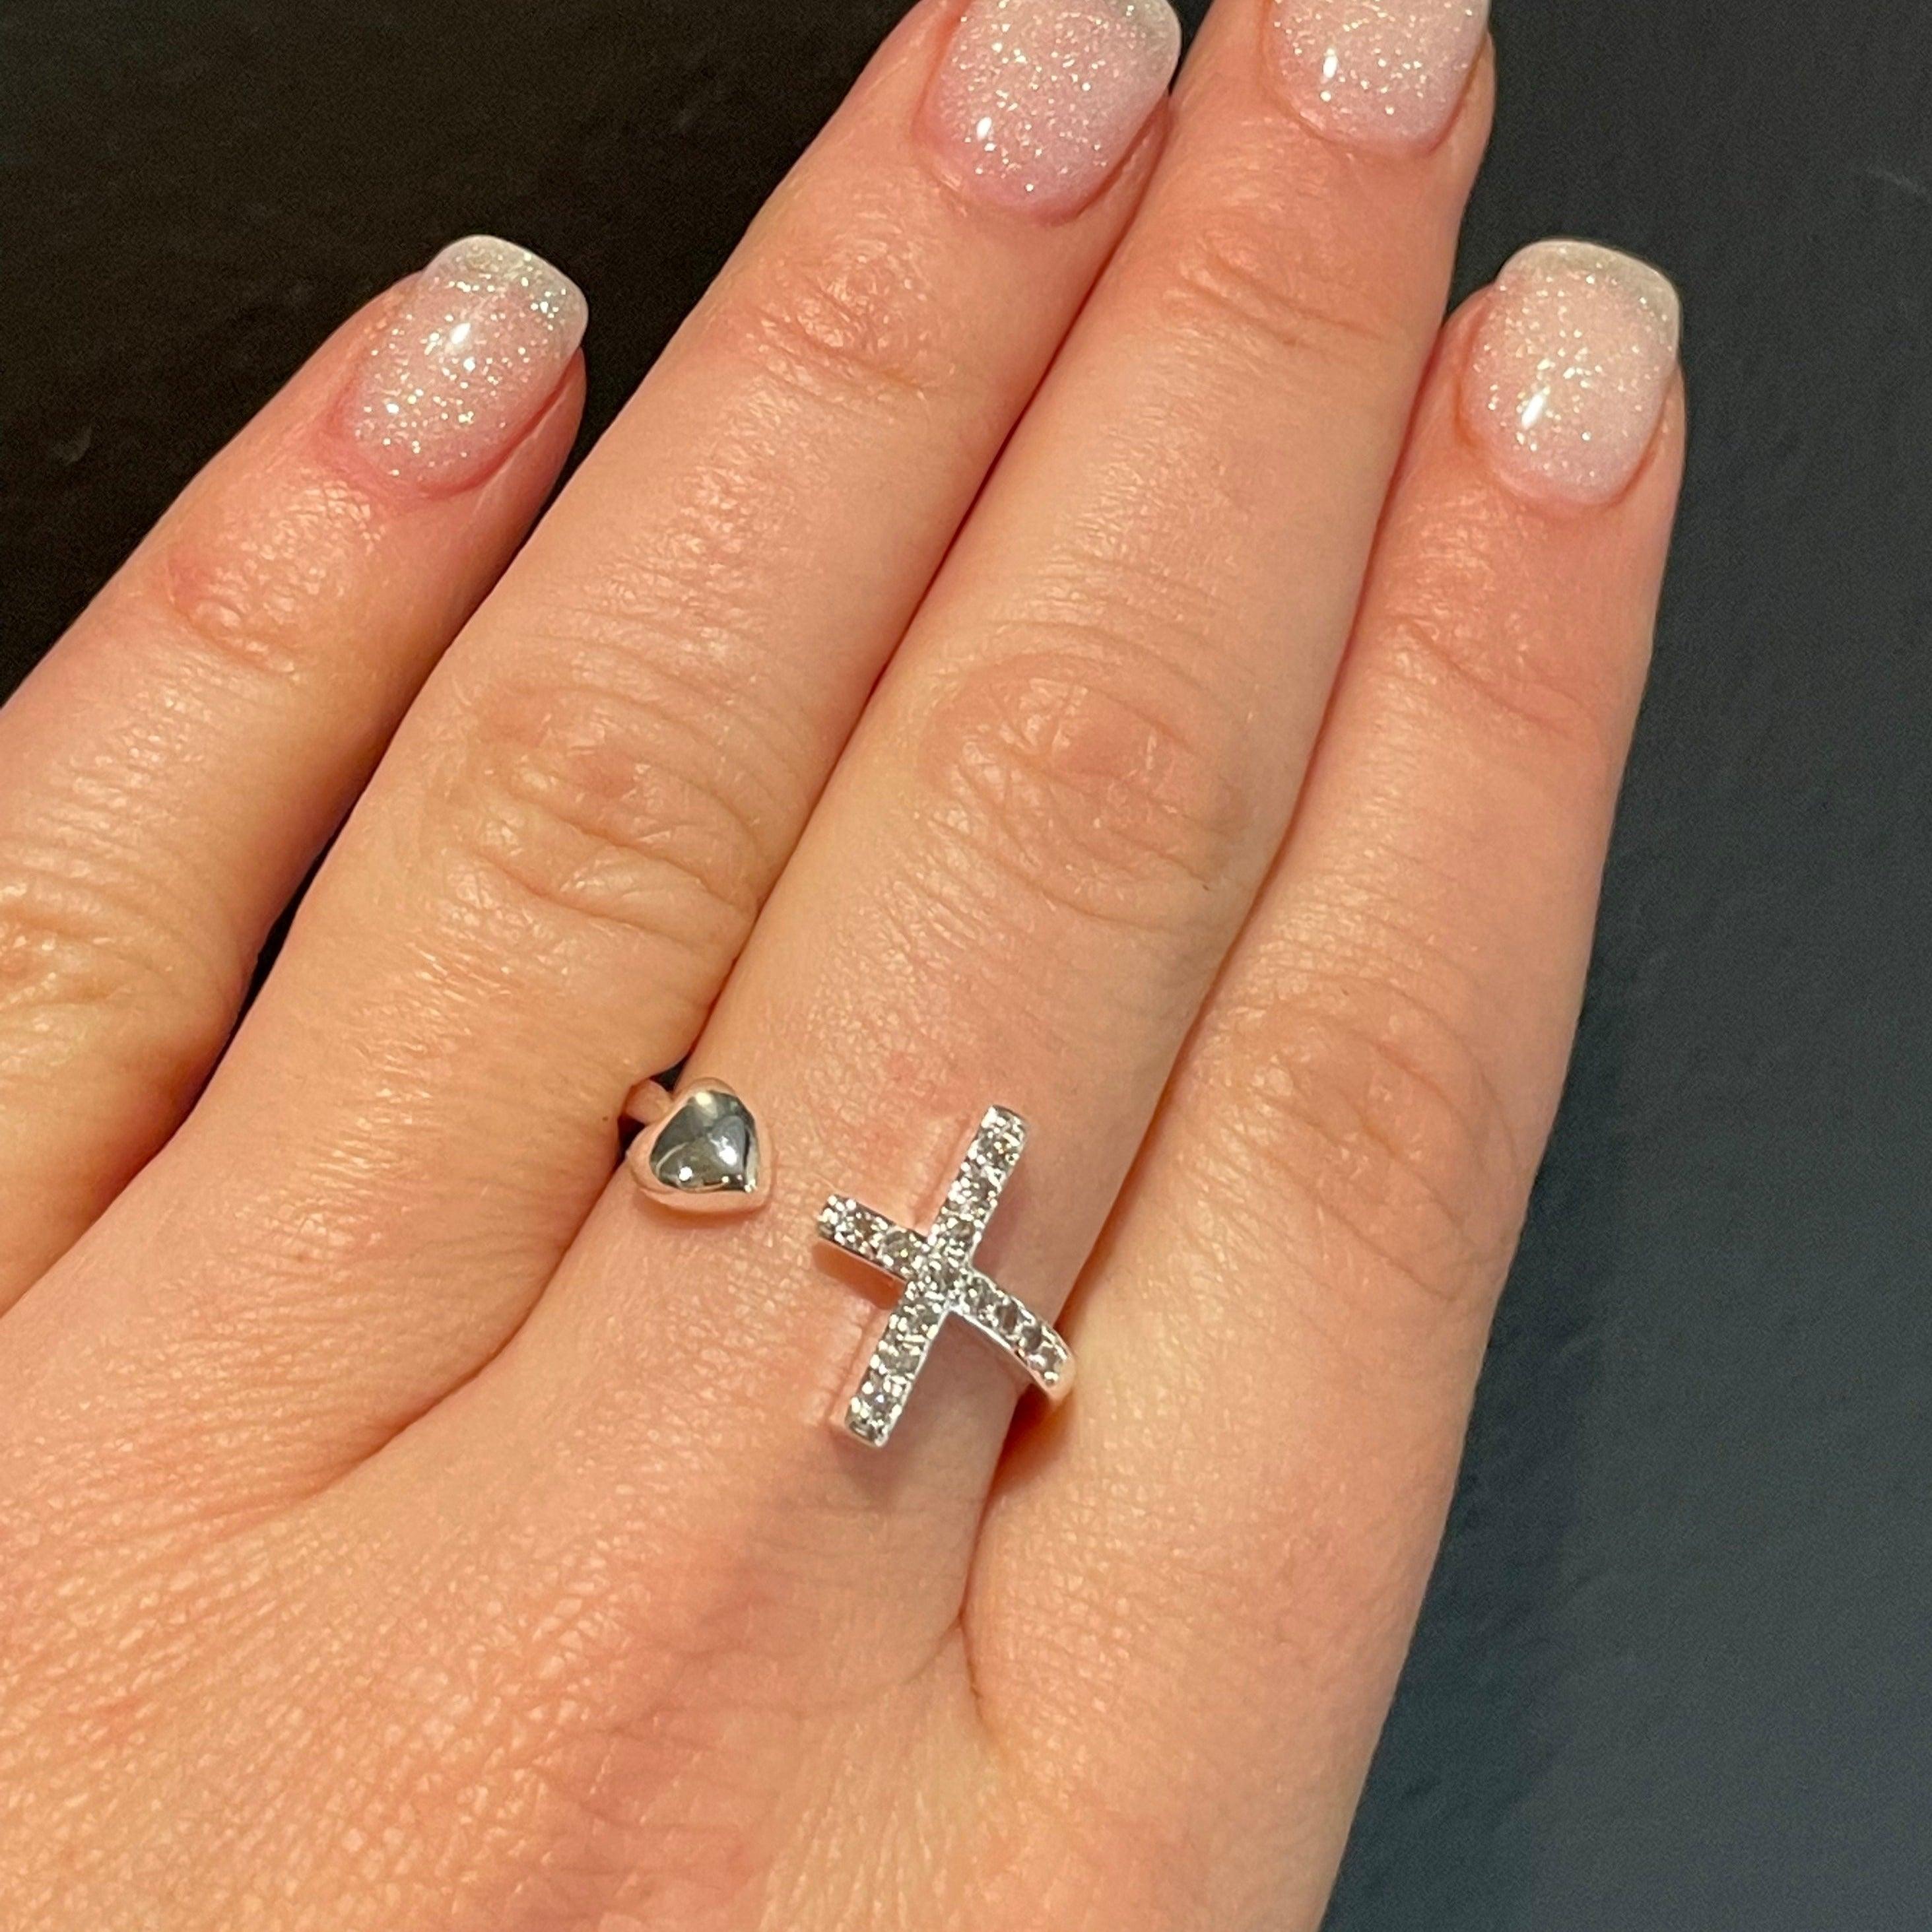 Christian Cross Adjustable Ring | How to wear rings, Christian cross, Adjustable  rings